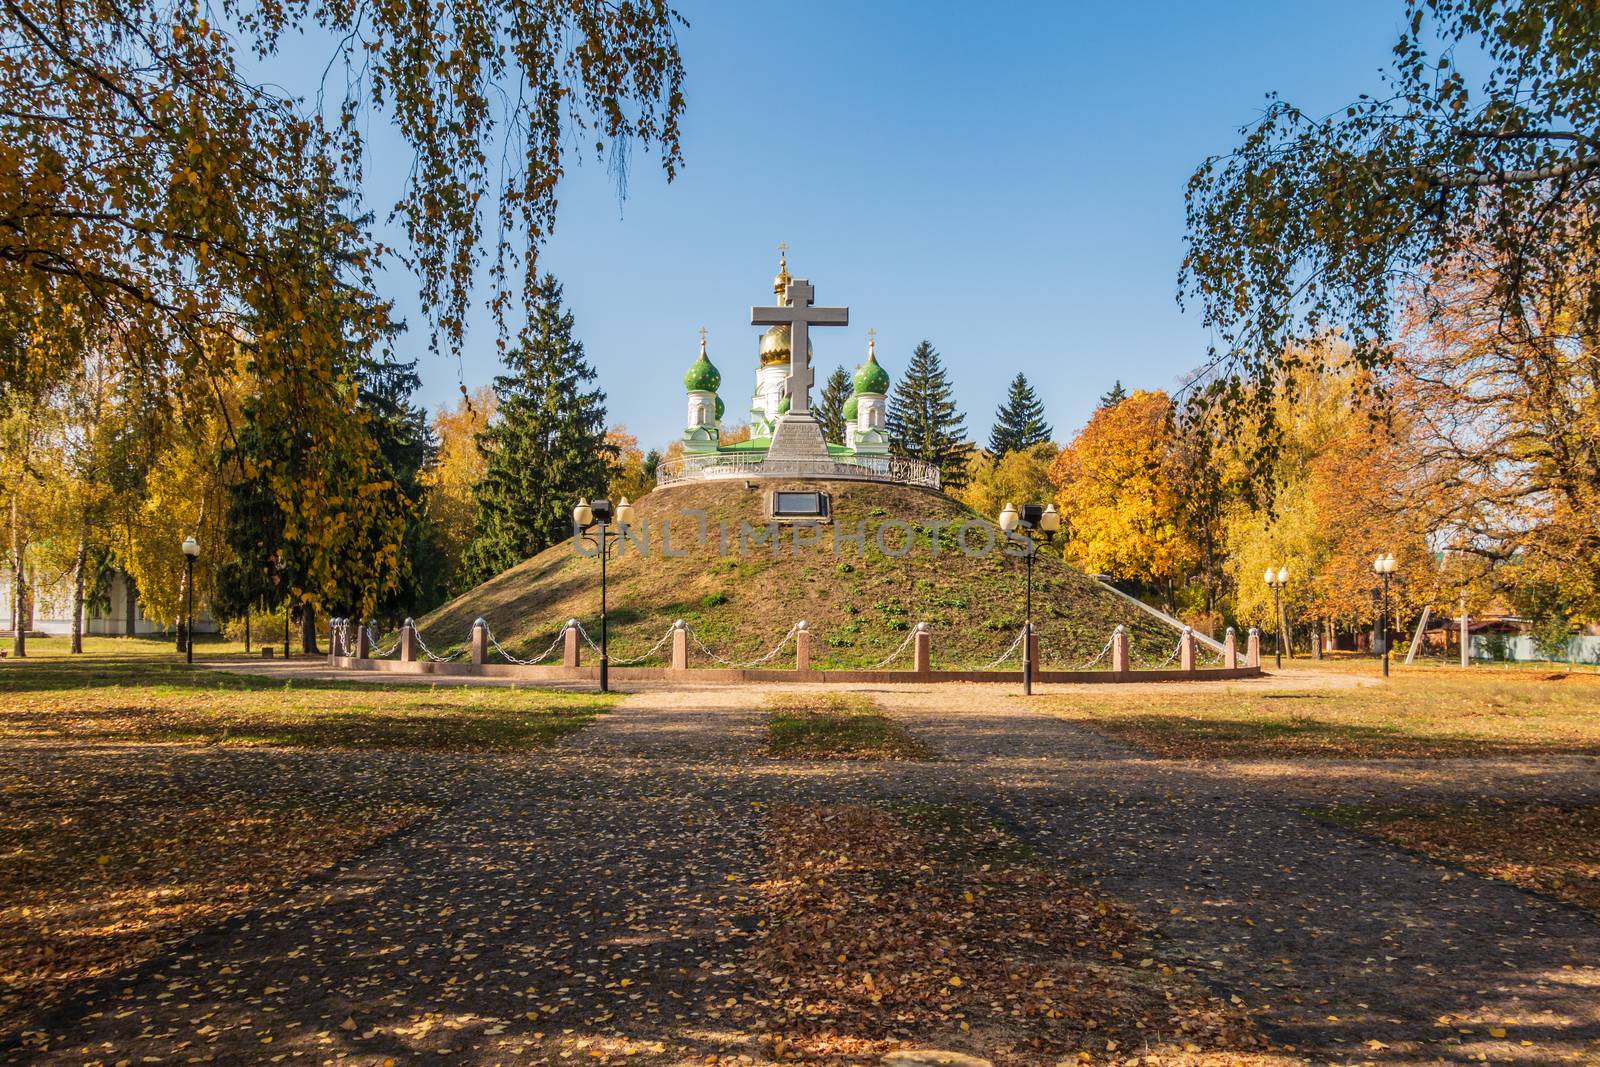 Poltava Battle. Brothery Grave of 1354 Russian Warriors in the territory state Historical and Cultural Reserve The Field of the Great Poltava Battle, UKRAINE